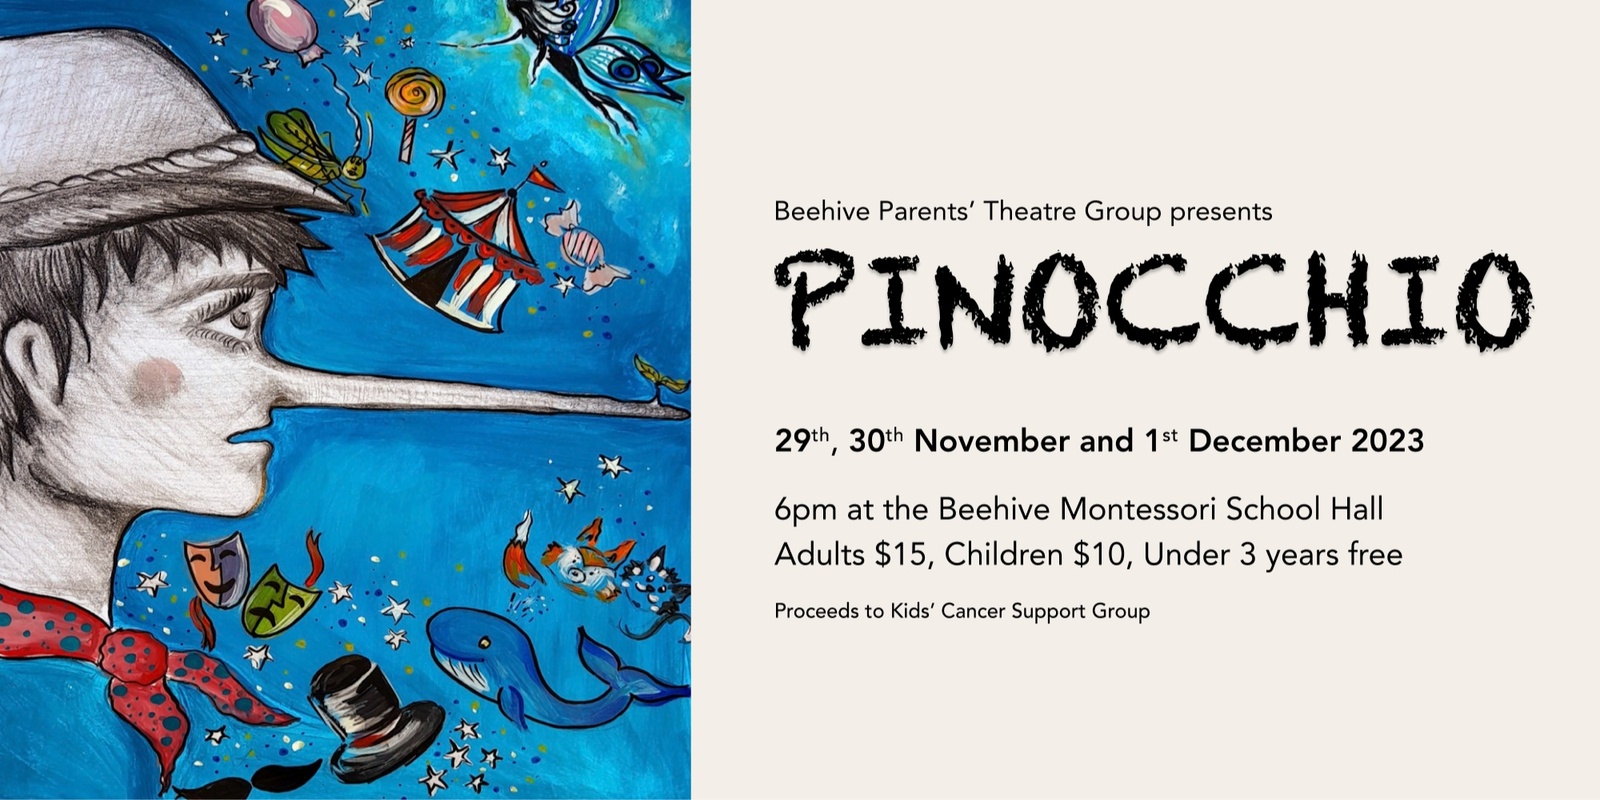 Banner image for Pinocchio - Beehive Parents Theatre Group